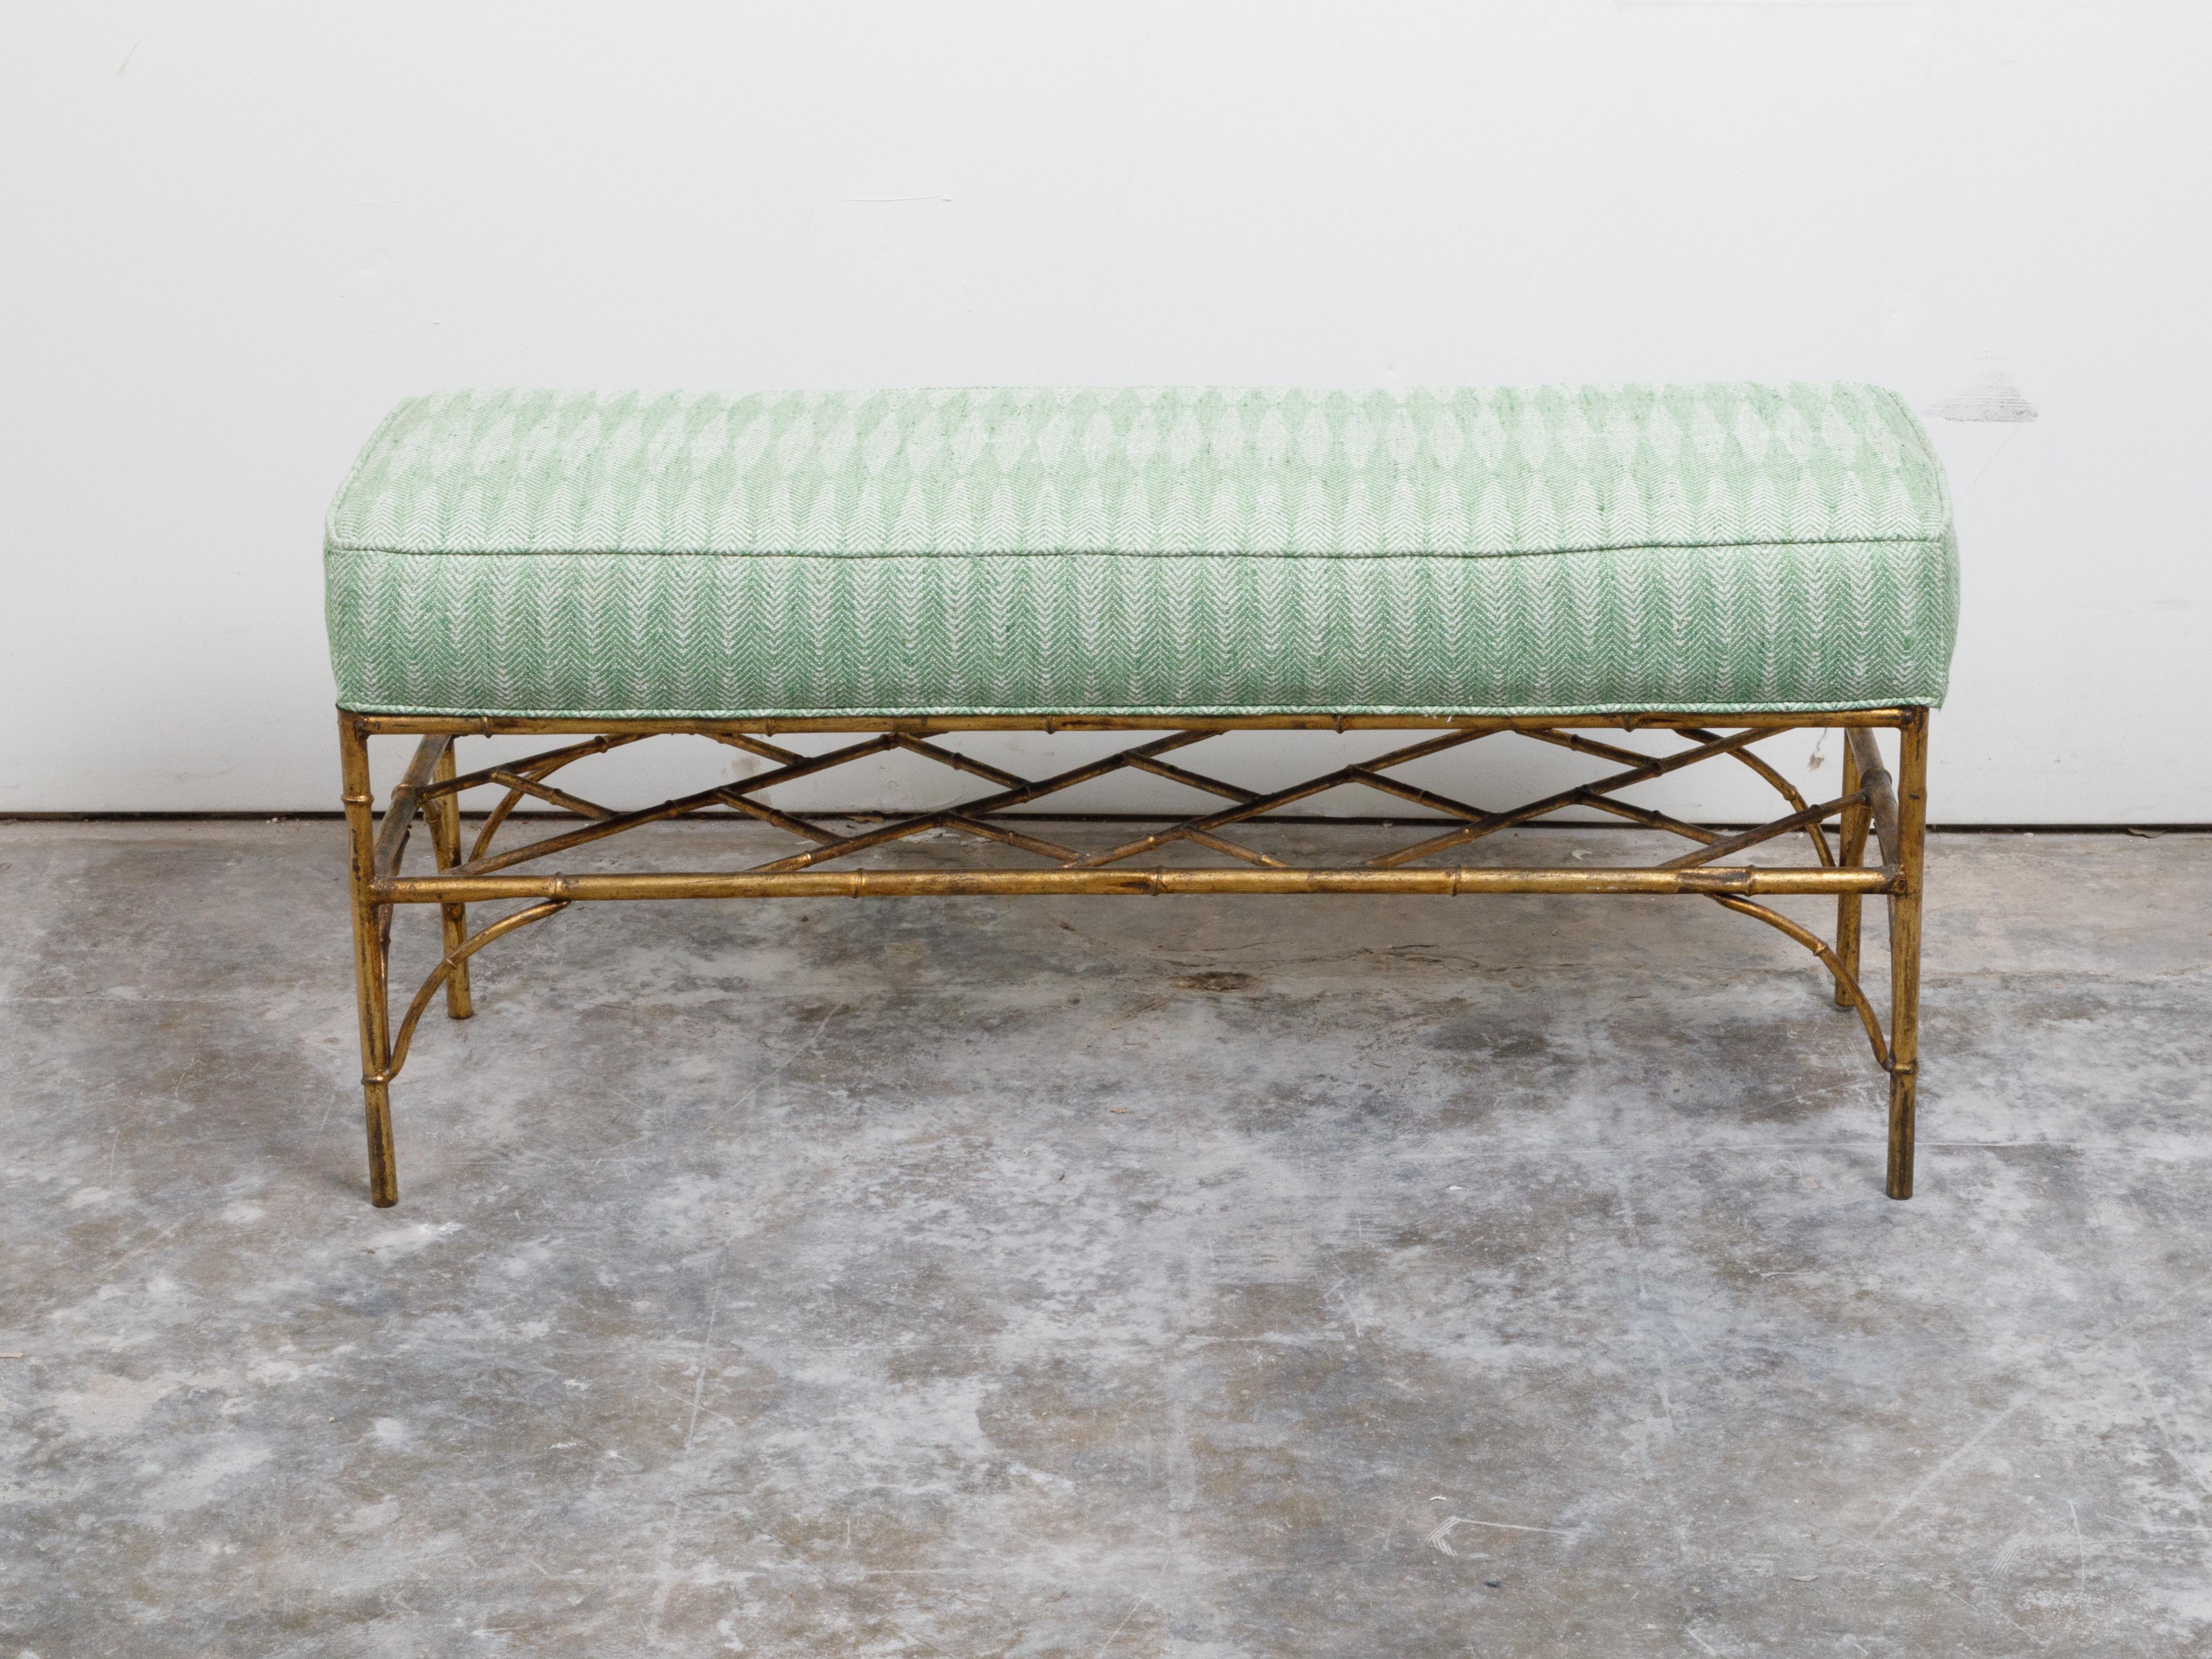 An Italian gilt metal bench from the mid 20th century, with faux bamboo base and green upholstery. Created in Italy during the midcentury period, this bench features a green upholstered seat resting above a four gilt metal faux bamboo legs connected